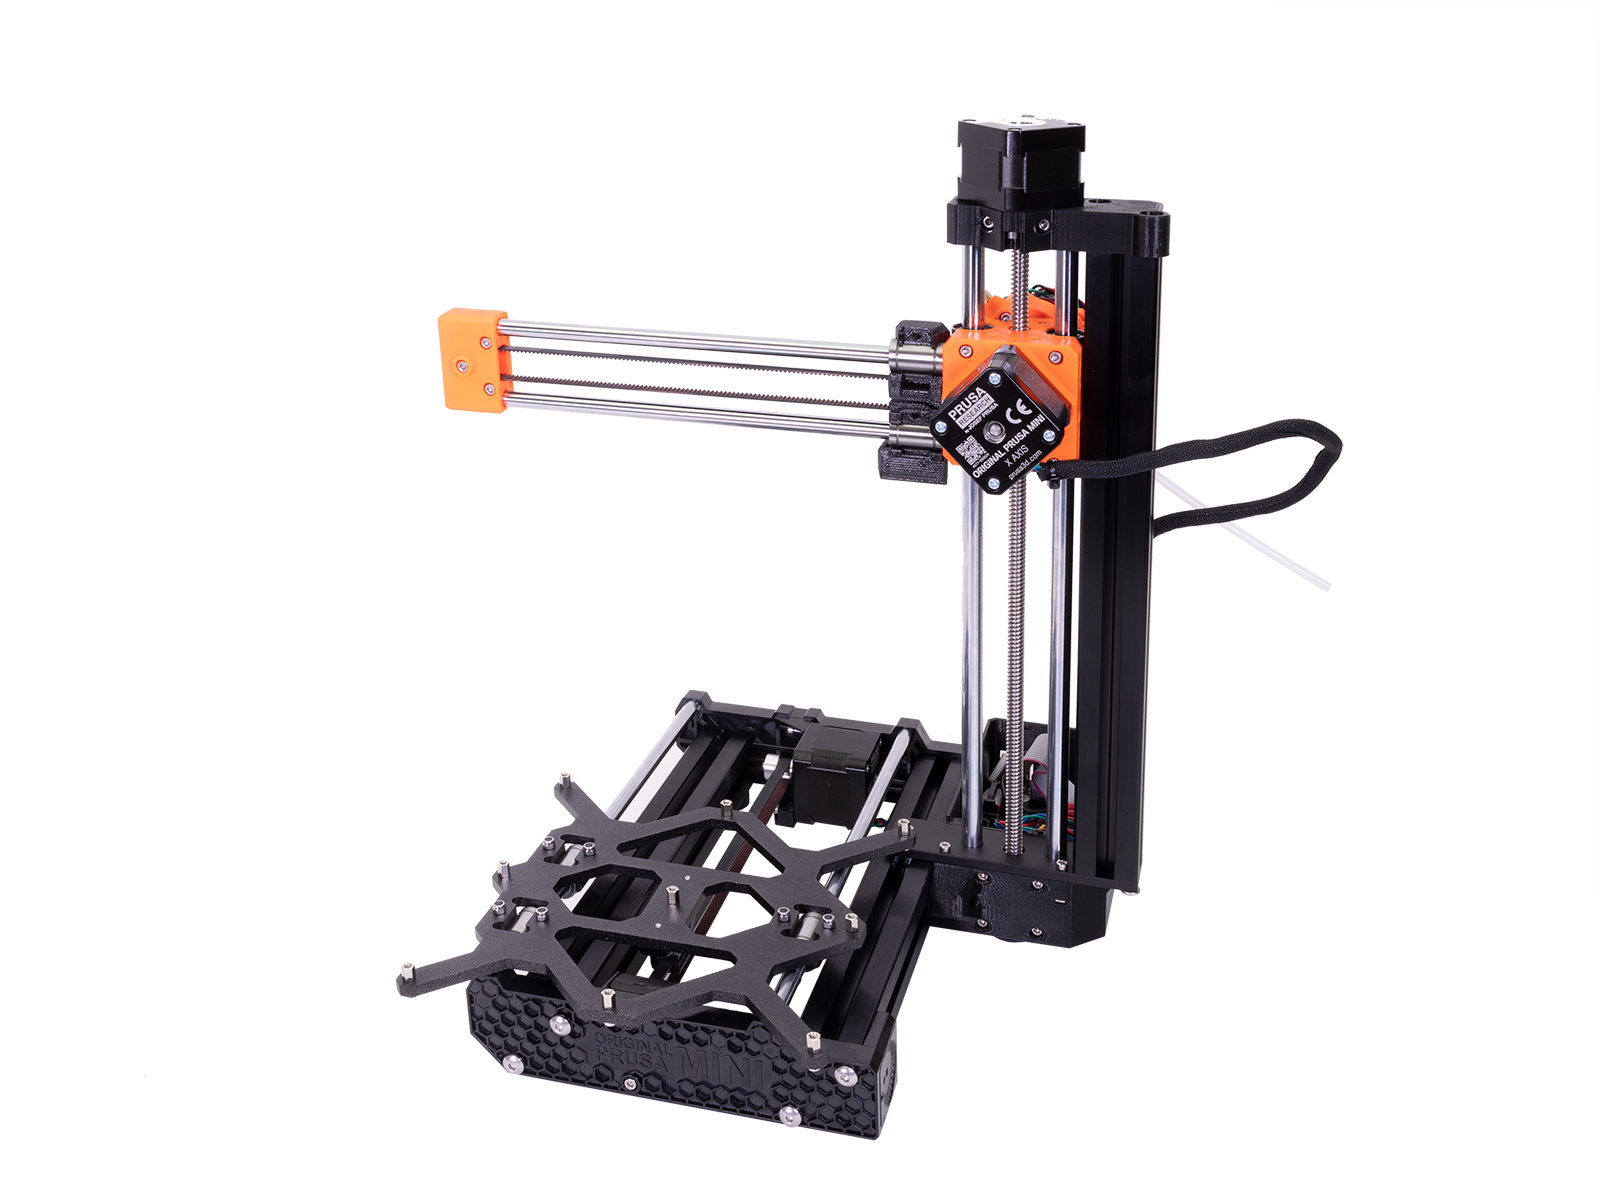 3. X-axis & Extruder assembly